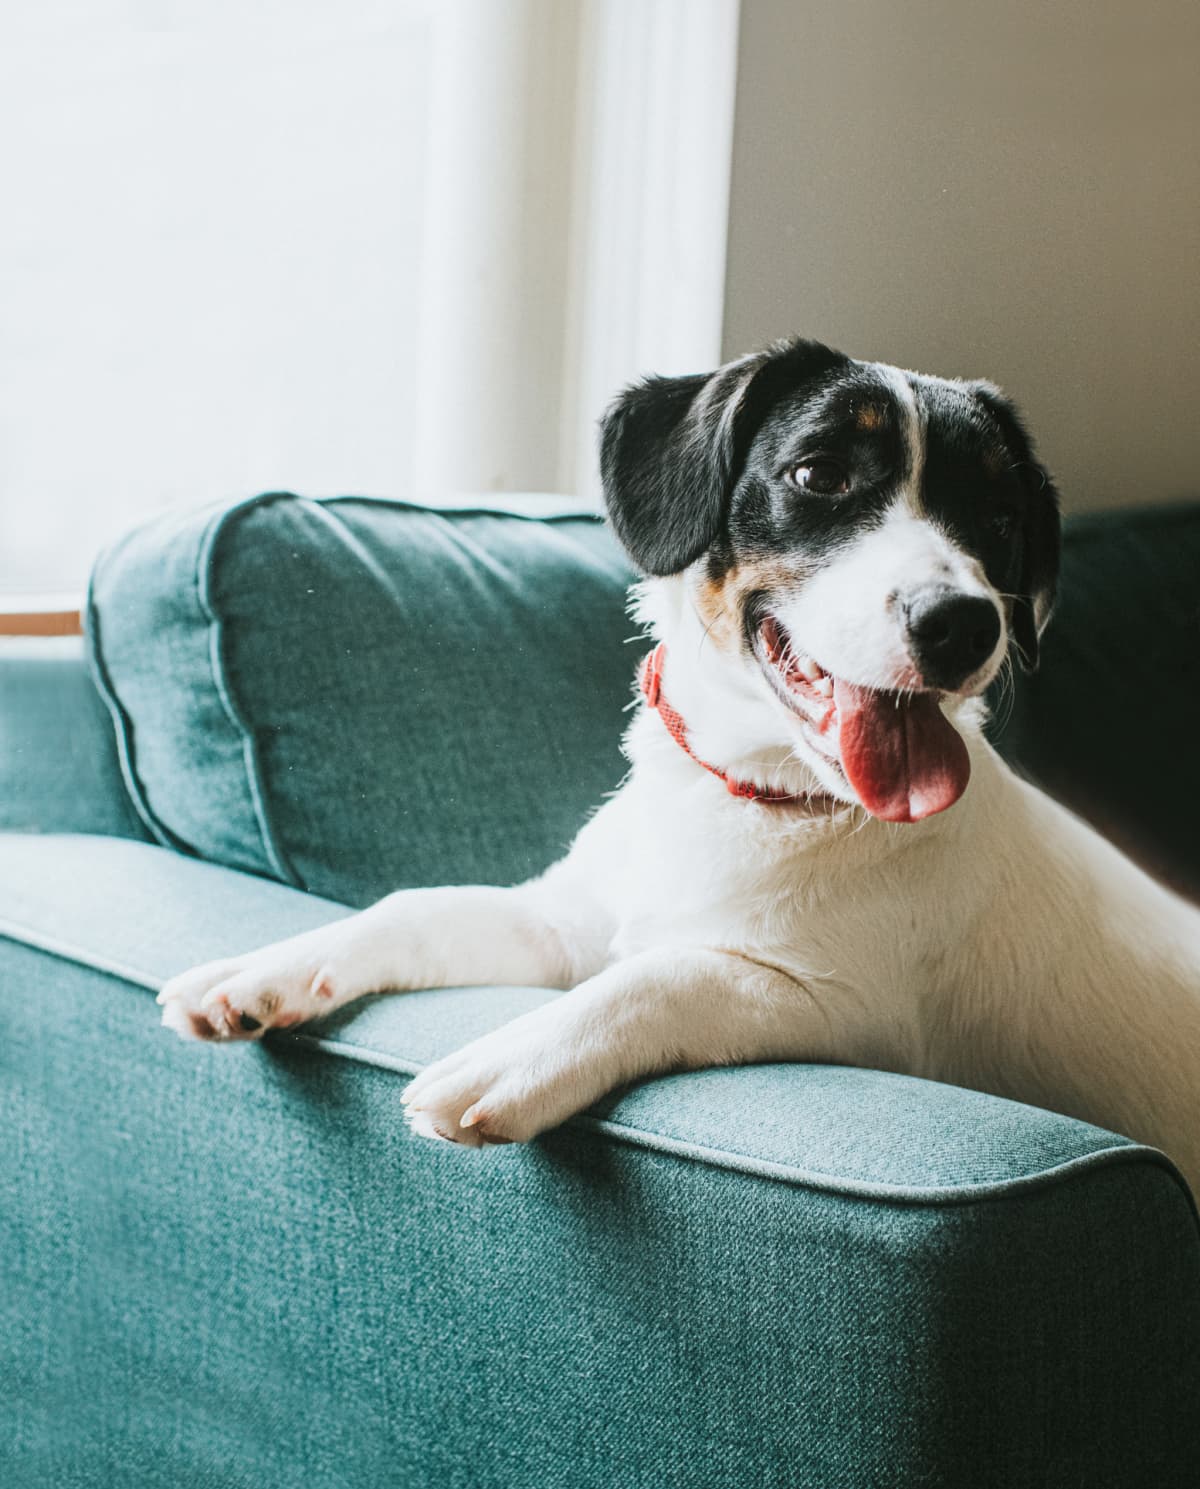 Young black and white dog sits on a comfortable blue sofa in front of a window, his paws over the arm of the chair and tongue hanging out.